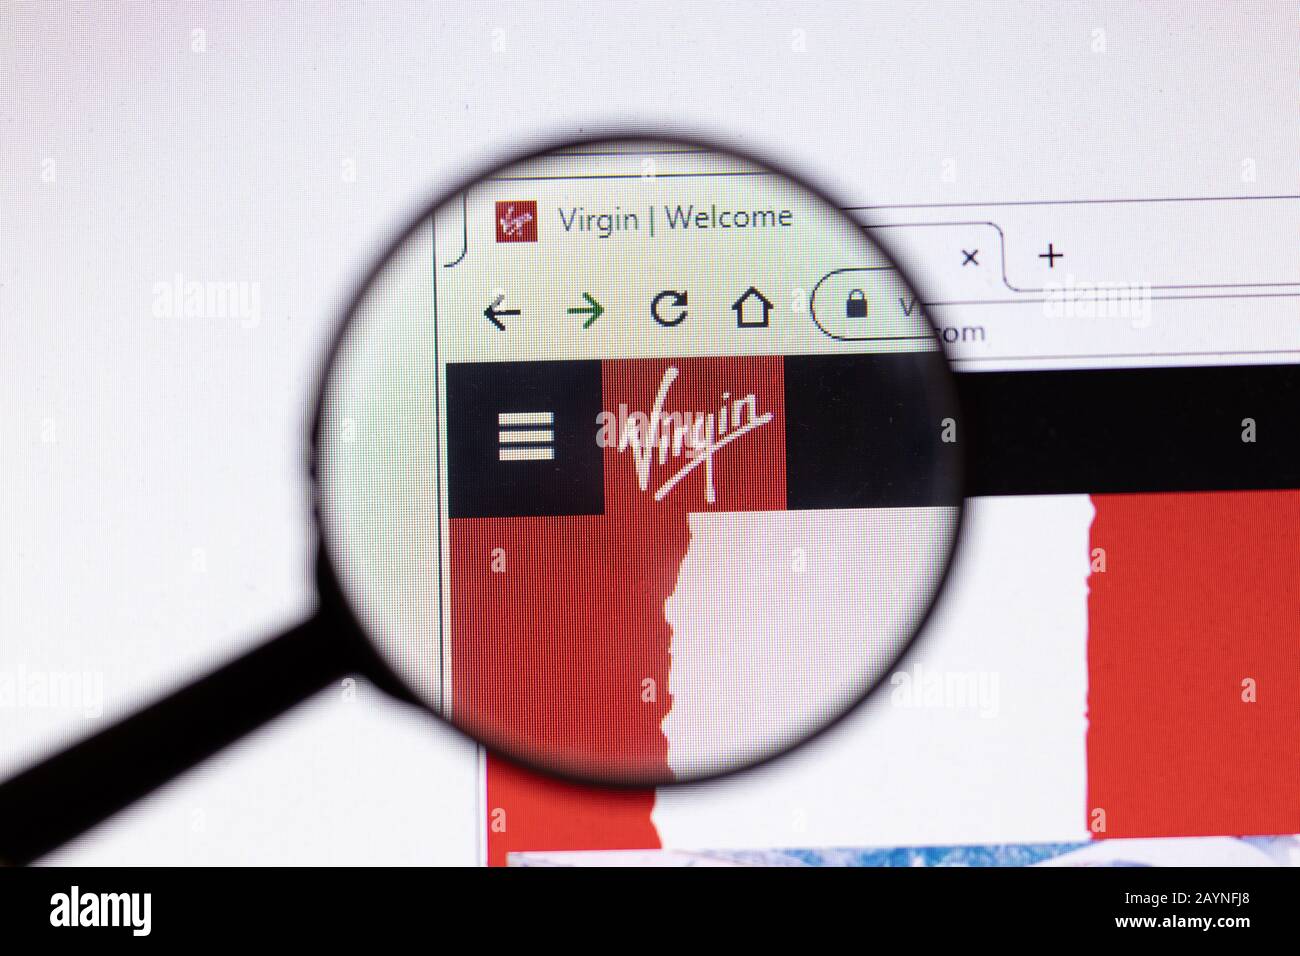 Saint-Petersburg, Russia - 18 February 2020: Virgin Group company website page logo on laptop display. Screen with icon, Illustrative Editorial Stock Photo